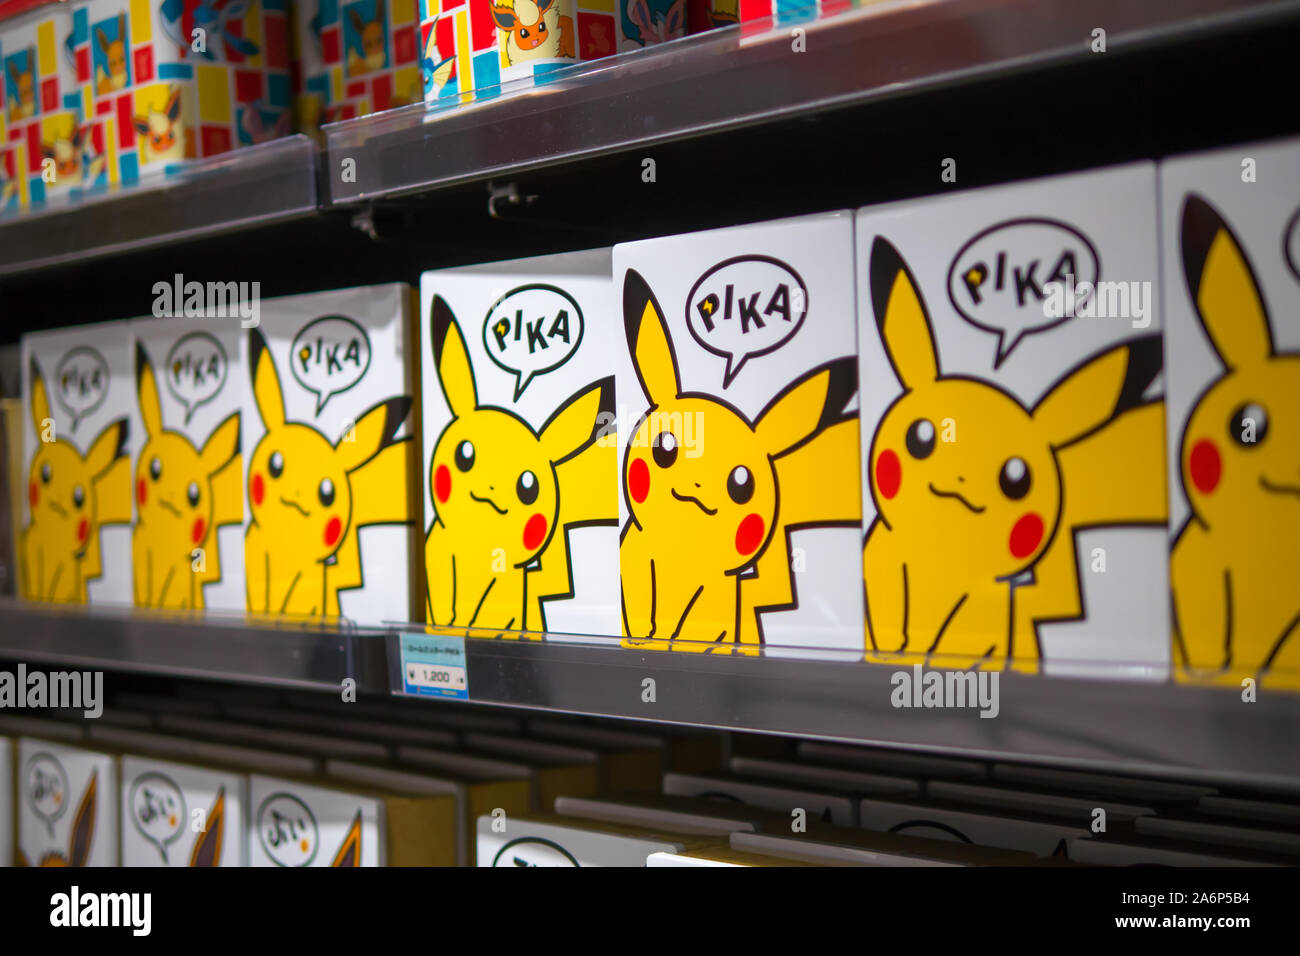 Games In Pokemon Store Kyoto Japan 3 August 19 Stock Photo Alamy